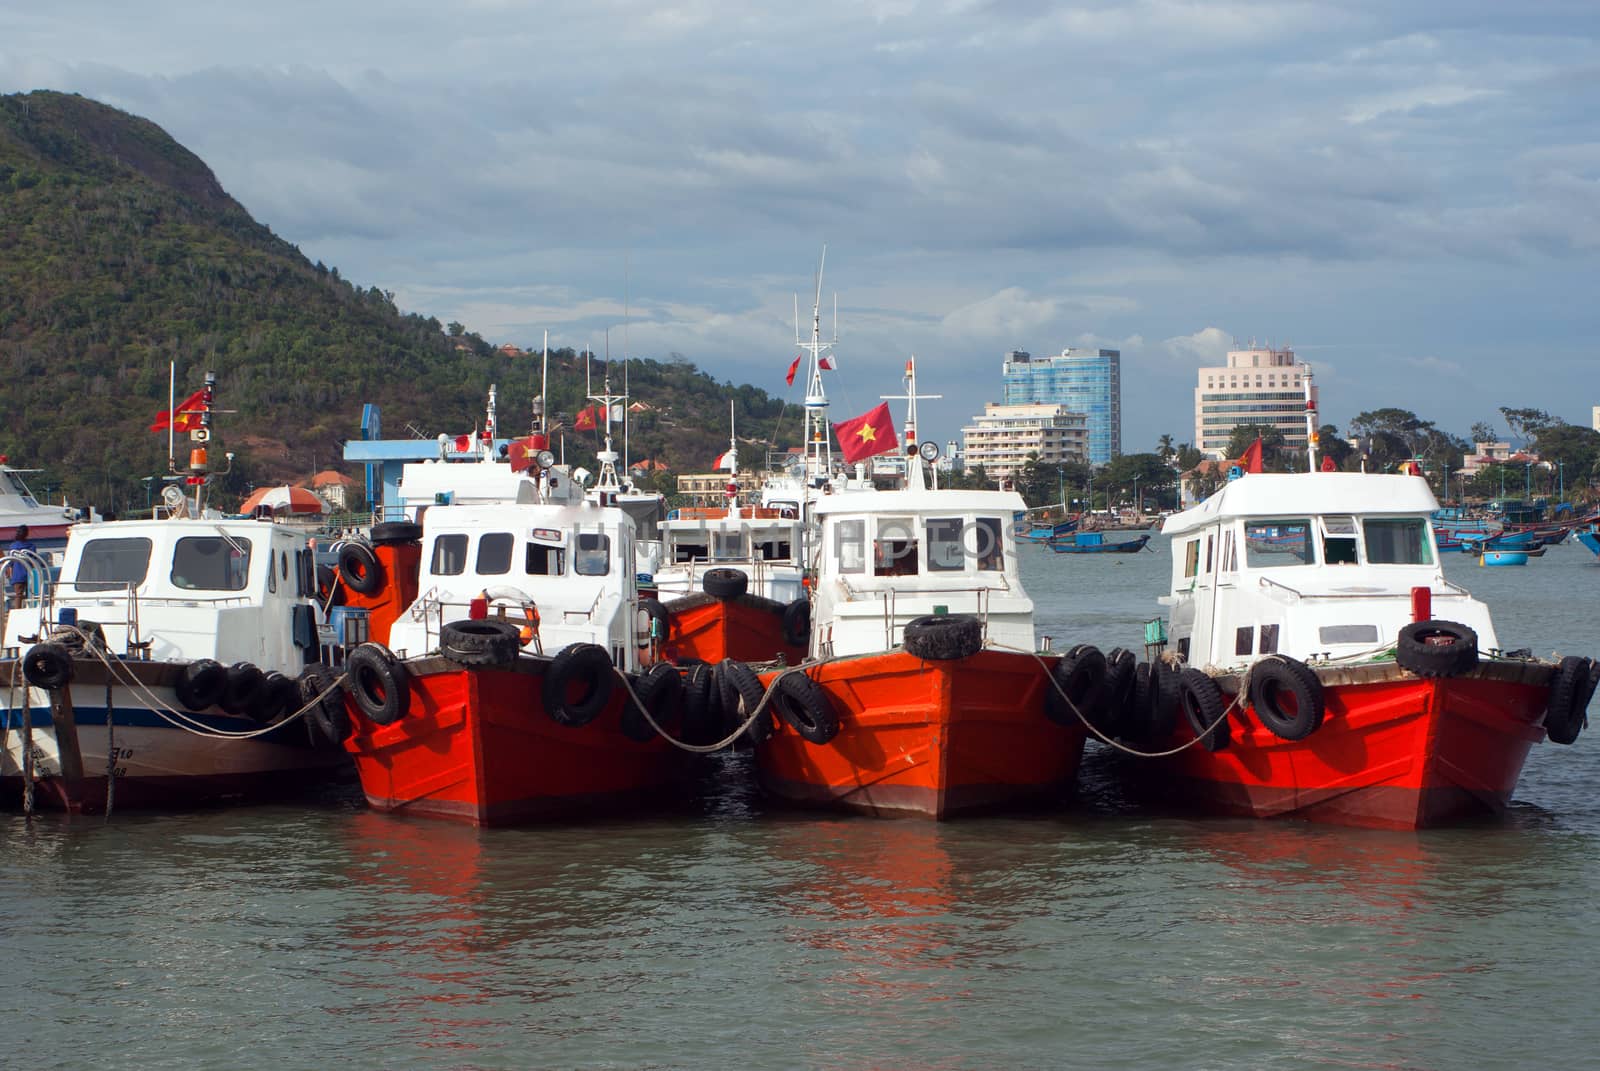 Fishing boats lined up at a dock in Vung Tau, Vietnam, Asia